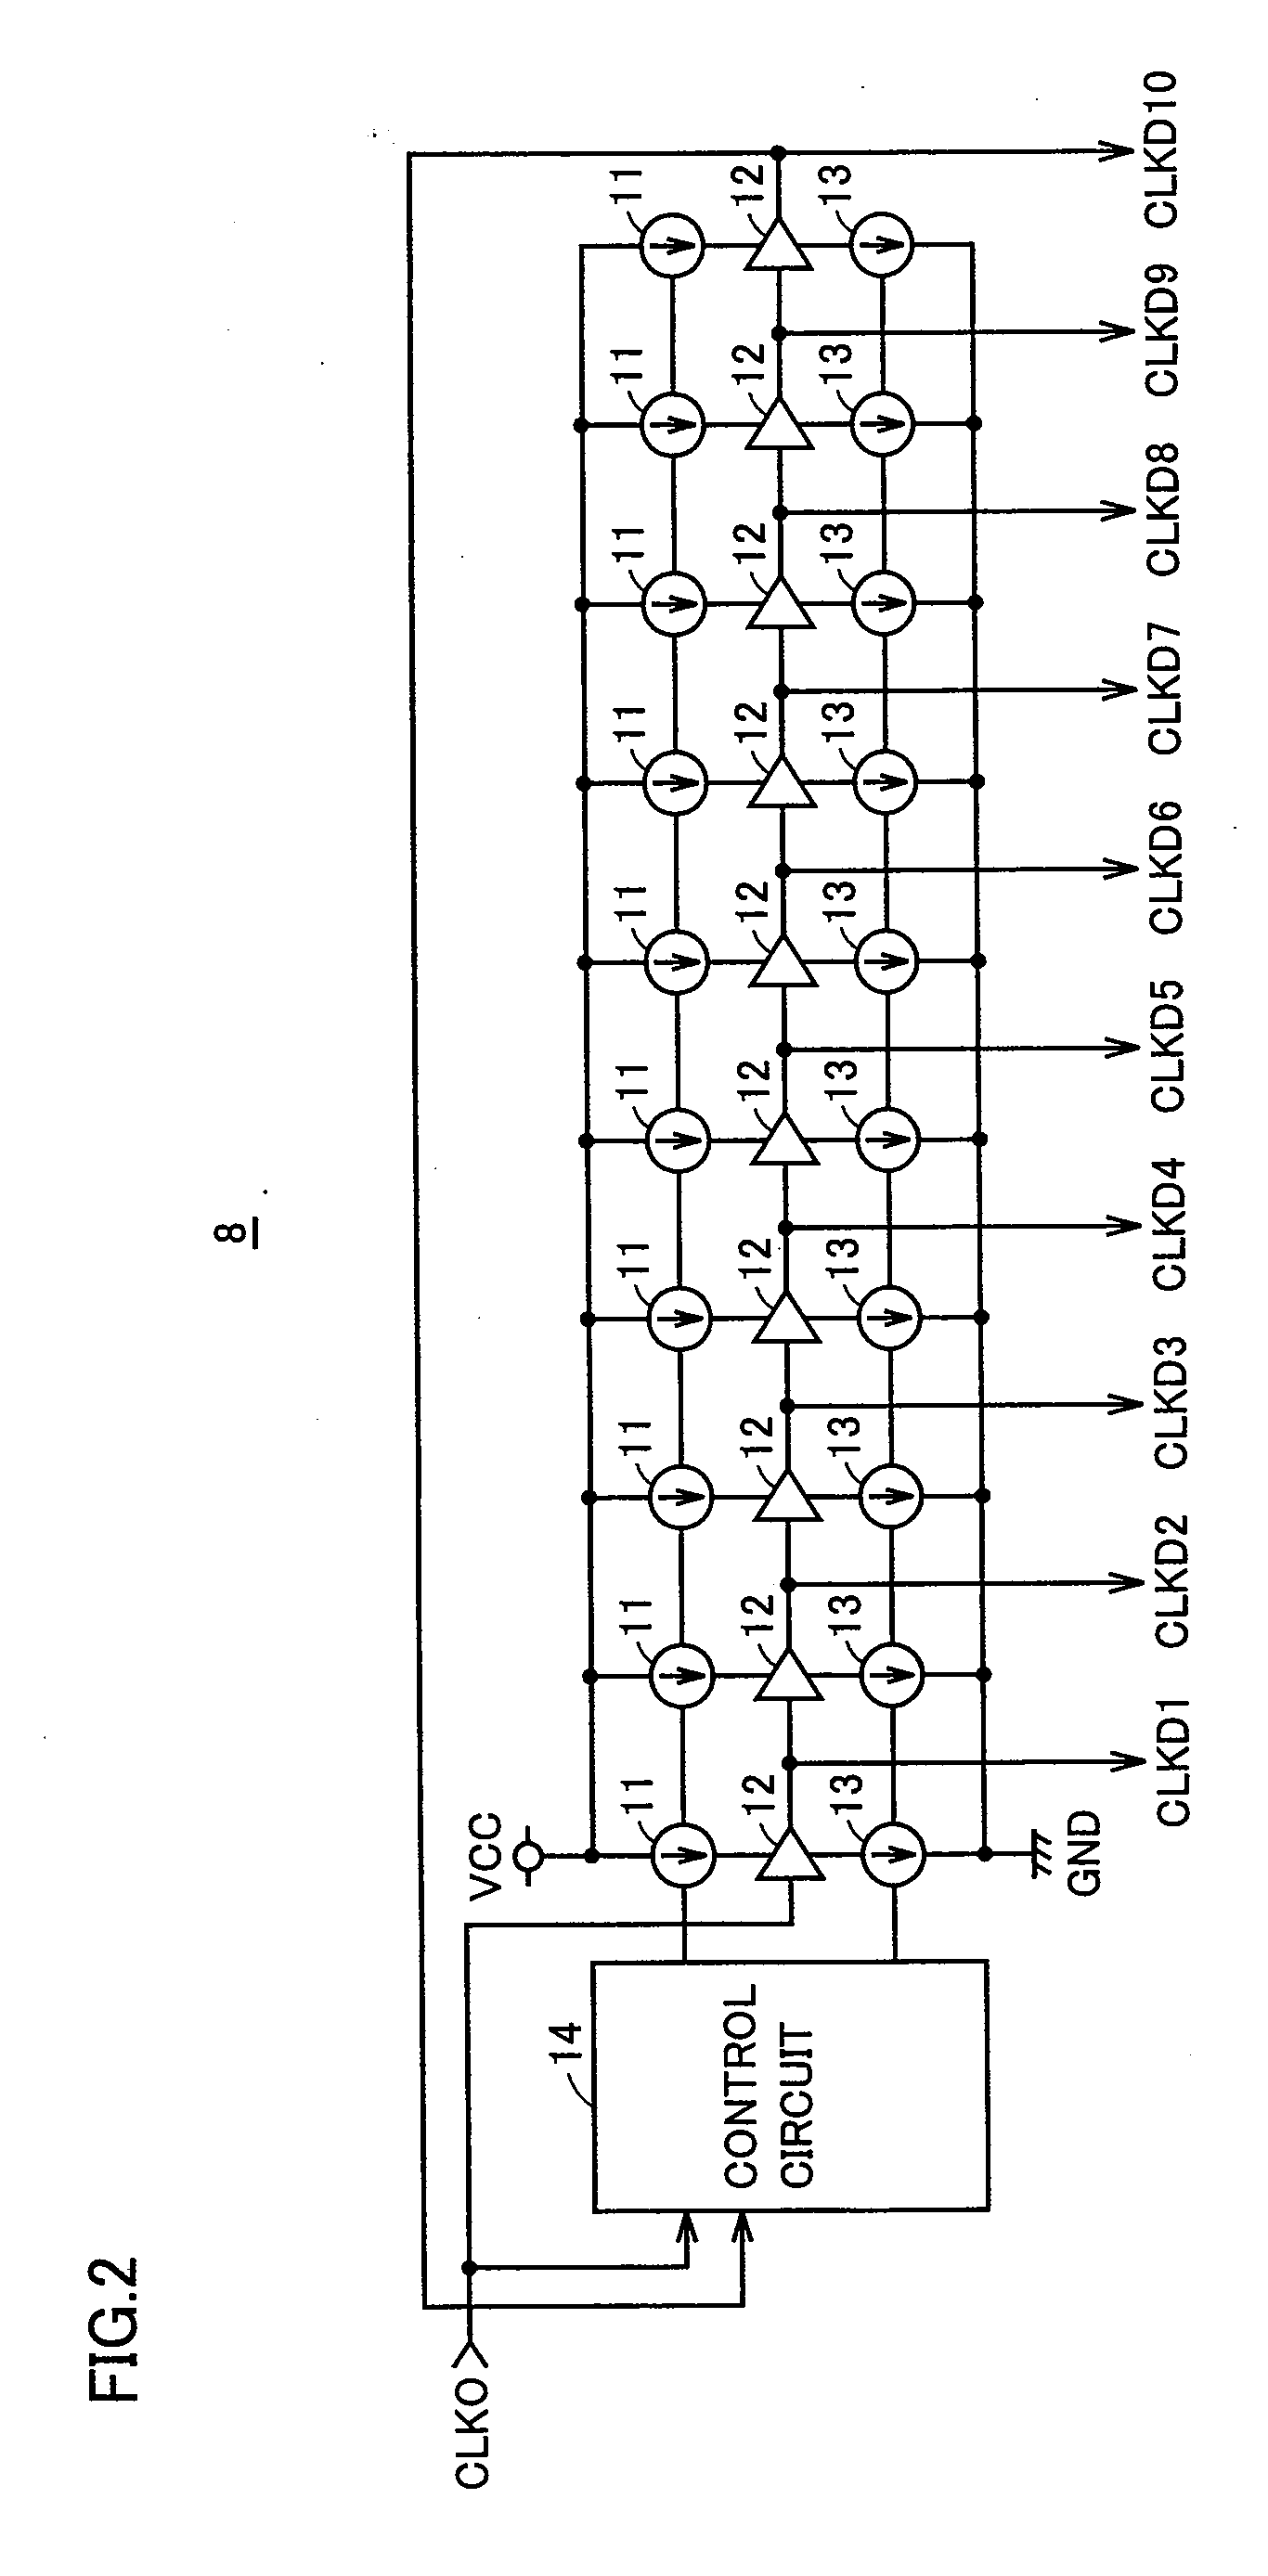 Spread spectrum clock generator capable of frequency modulation with high accuracy